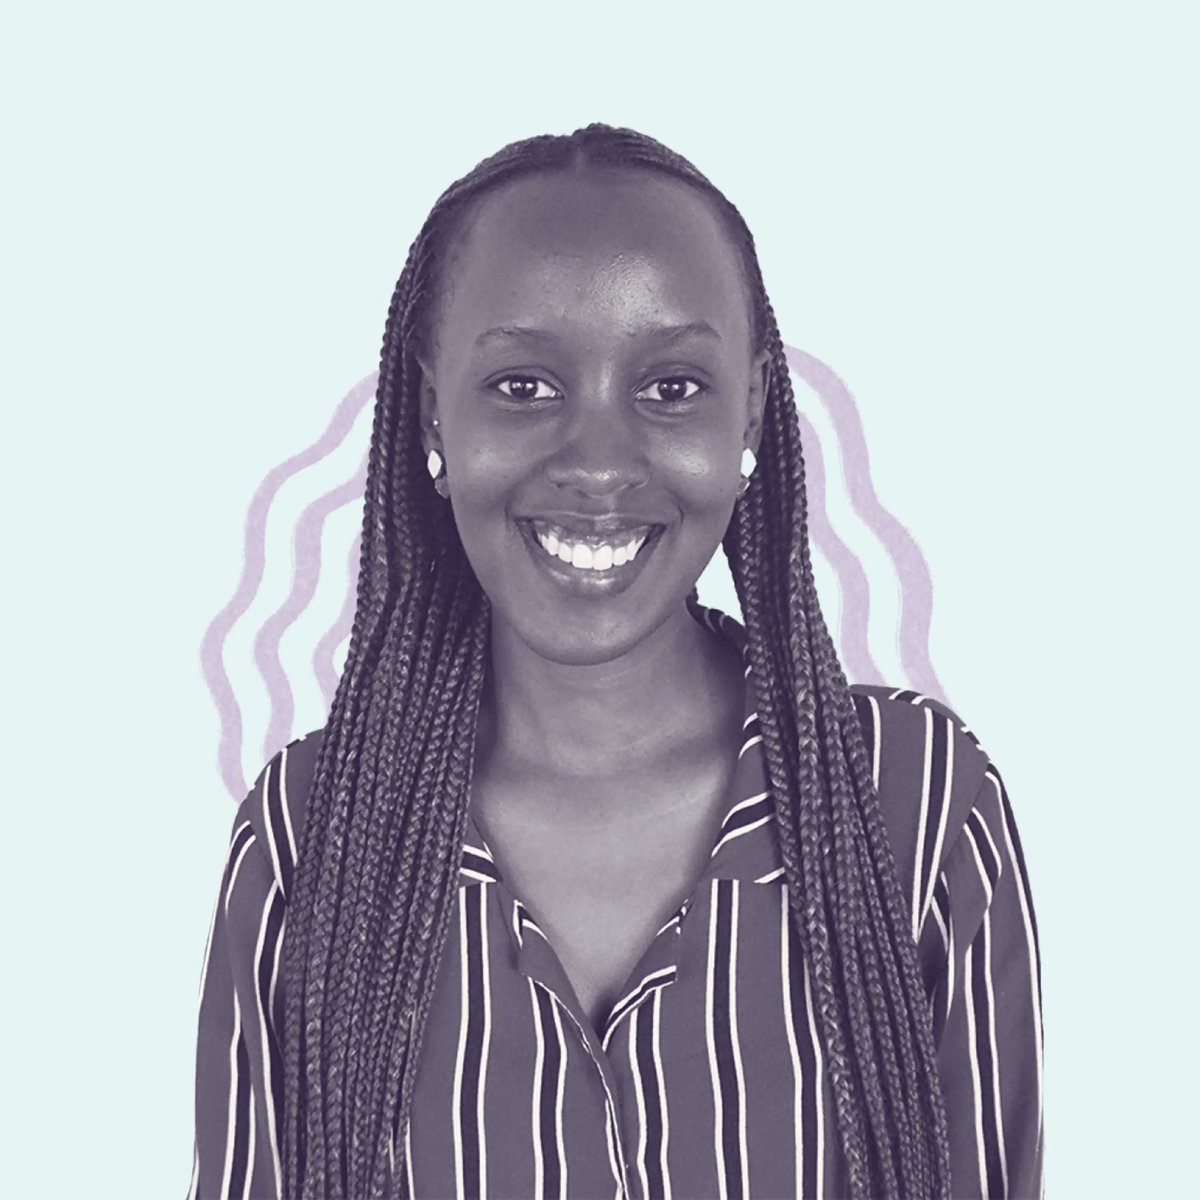 Today we shine our Staff Spotlight🌟 on Yvonne Uwera, a @ghcorps Fellow who recently joined us in the role of Project Coordinator. Yvonne is passionate about youth empowerment, mental health, and gender equality. She loves reading and fashion! Happy to have you onboard Yvonne! 💜